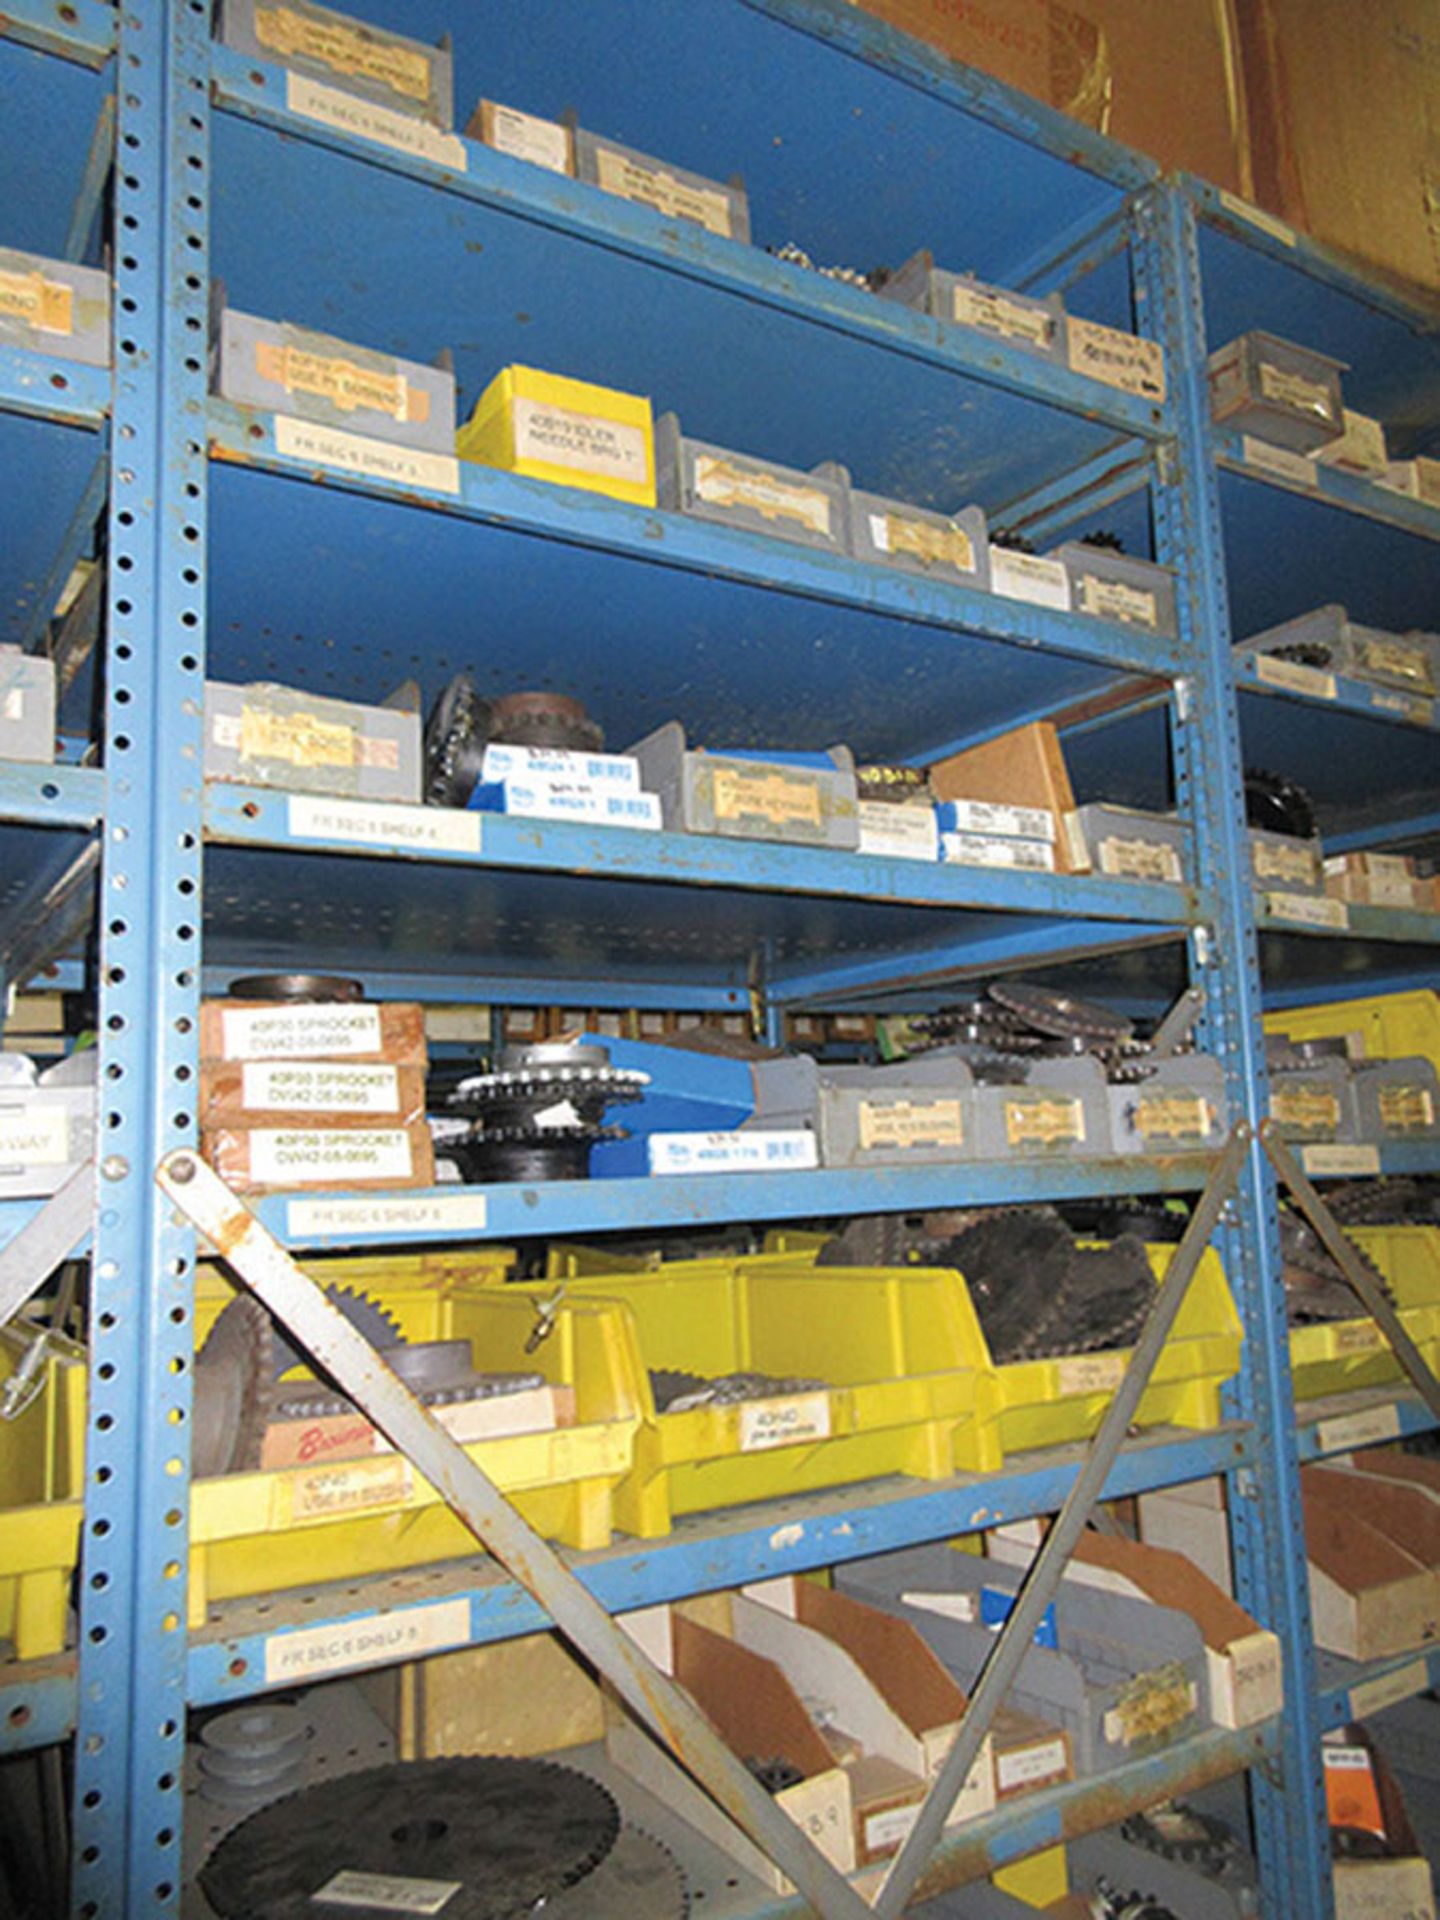 CONTENTS OF (1) SIDE, (5) SECTIONS OF SHELF UNIT: LARGE QUANTITY OF SOCKETS - MANY SIZES; BUSSMAN - Image 3 of 10